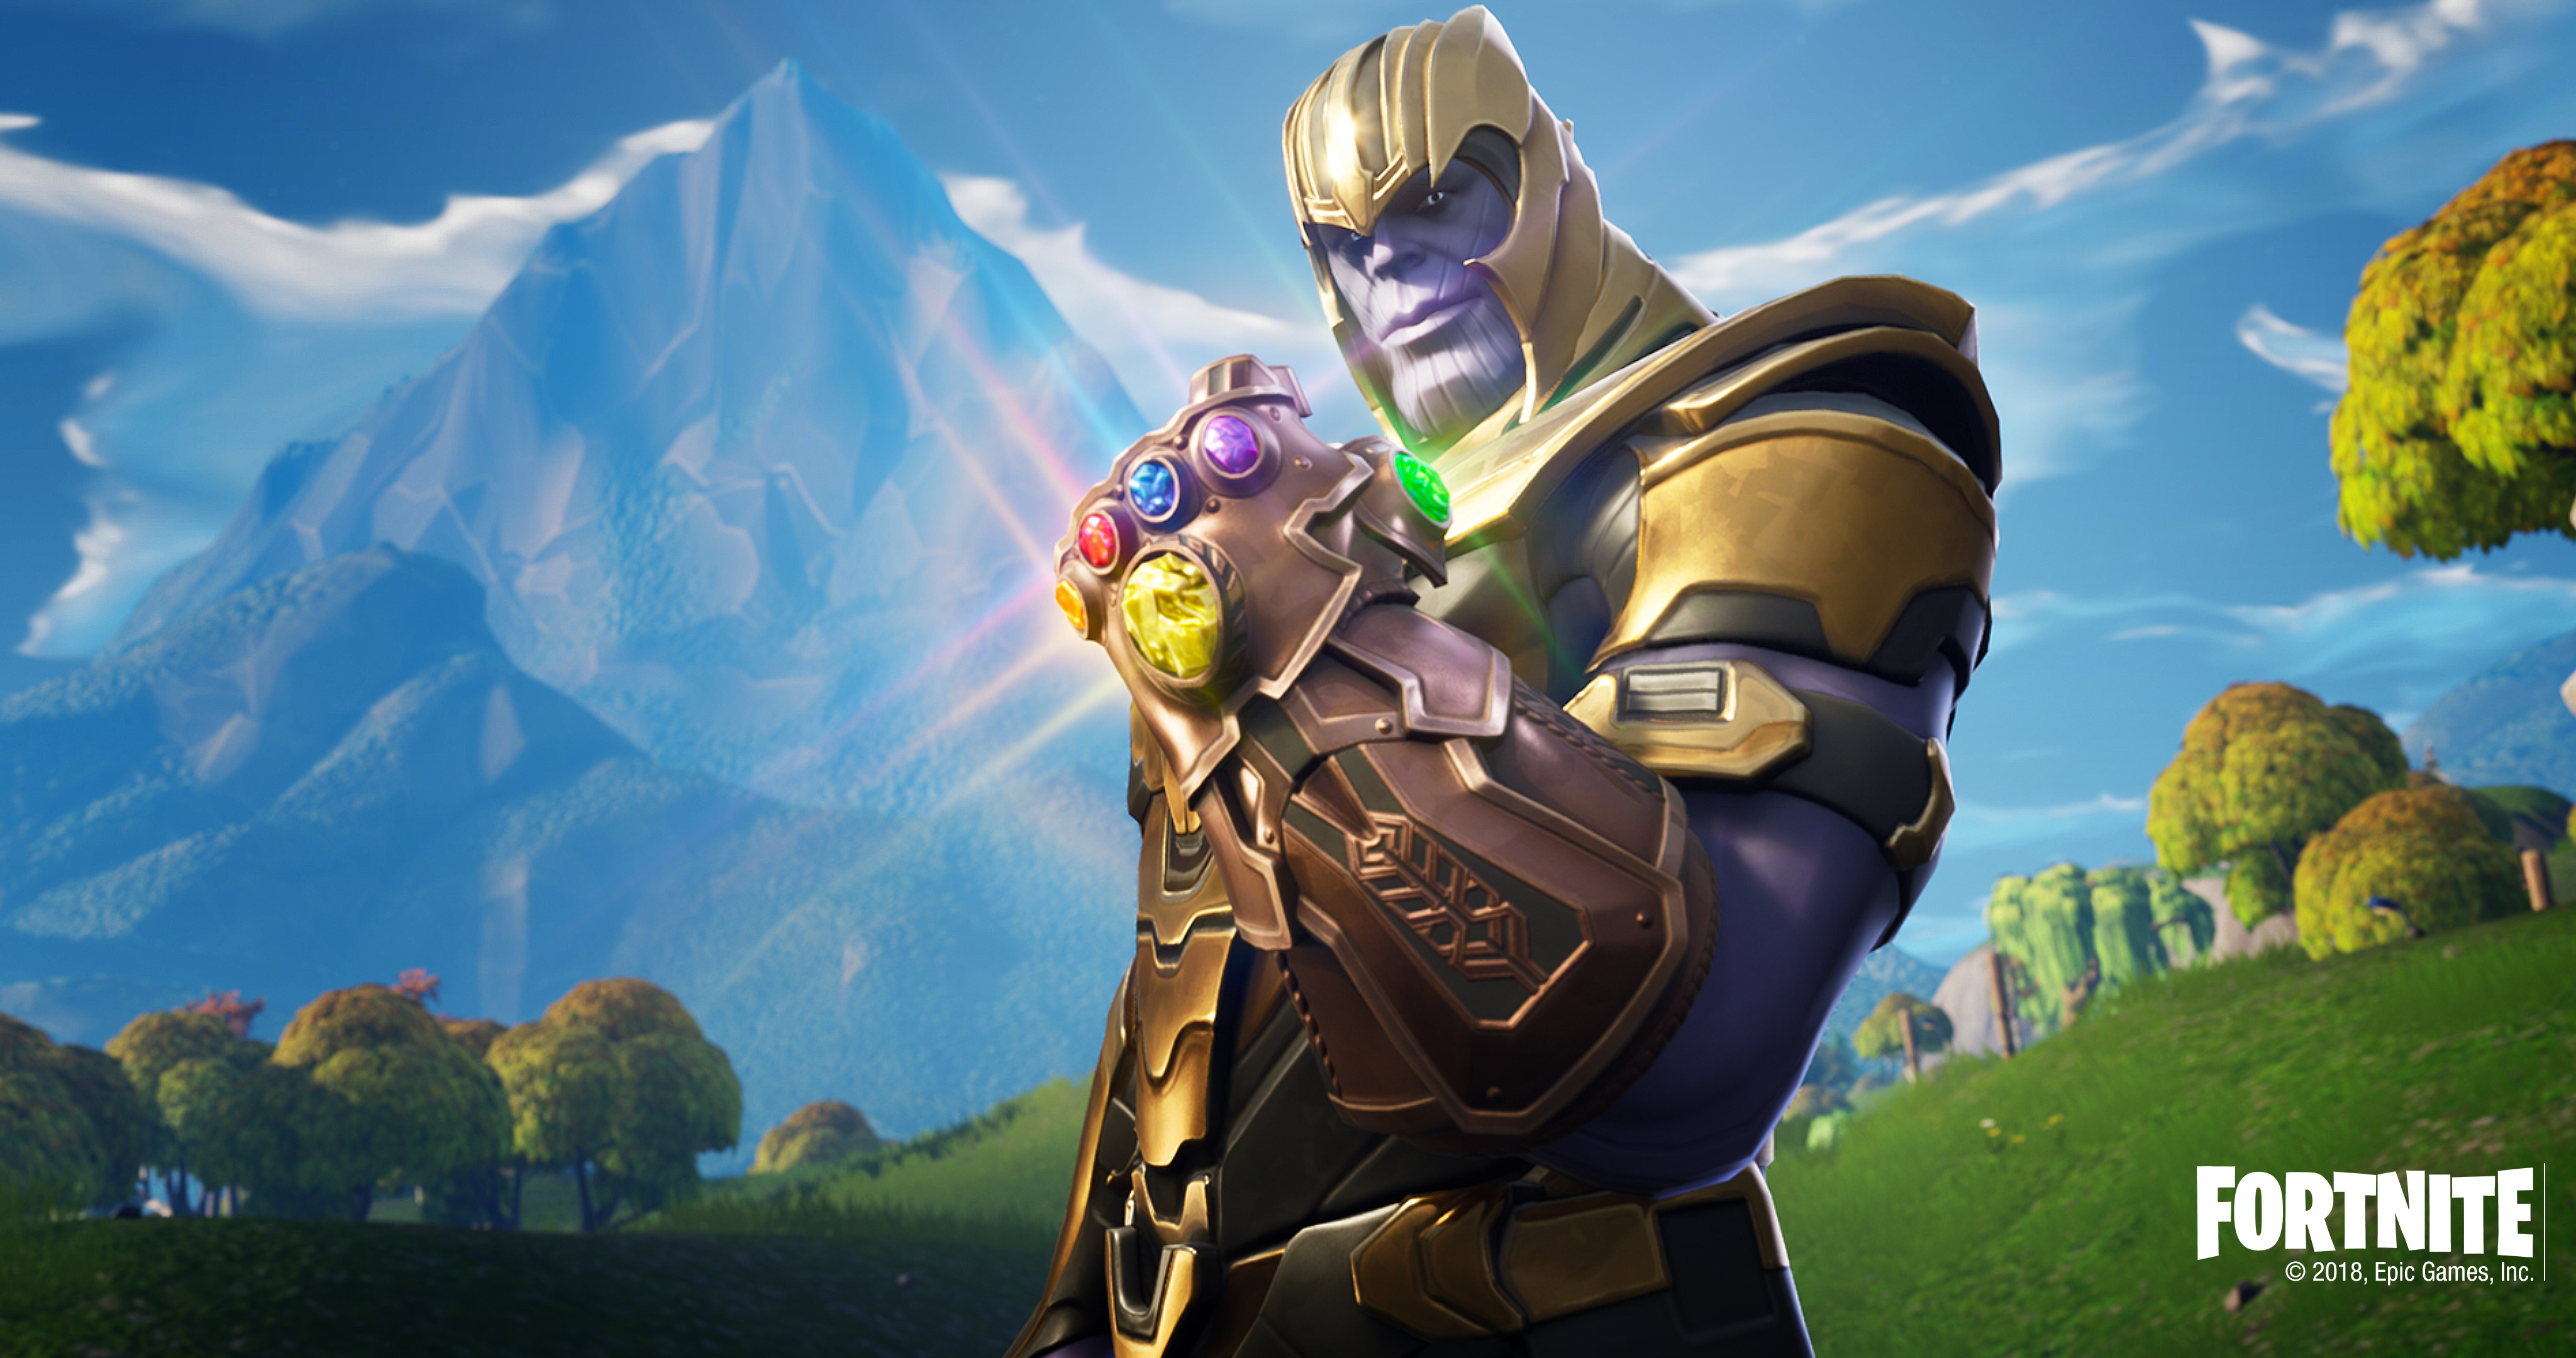 4096x2160 Thanos In Fortnite Battle Royale 4096x2160 Resolution ...